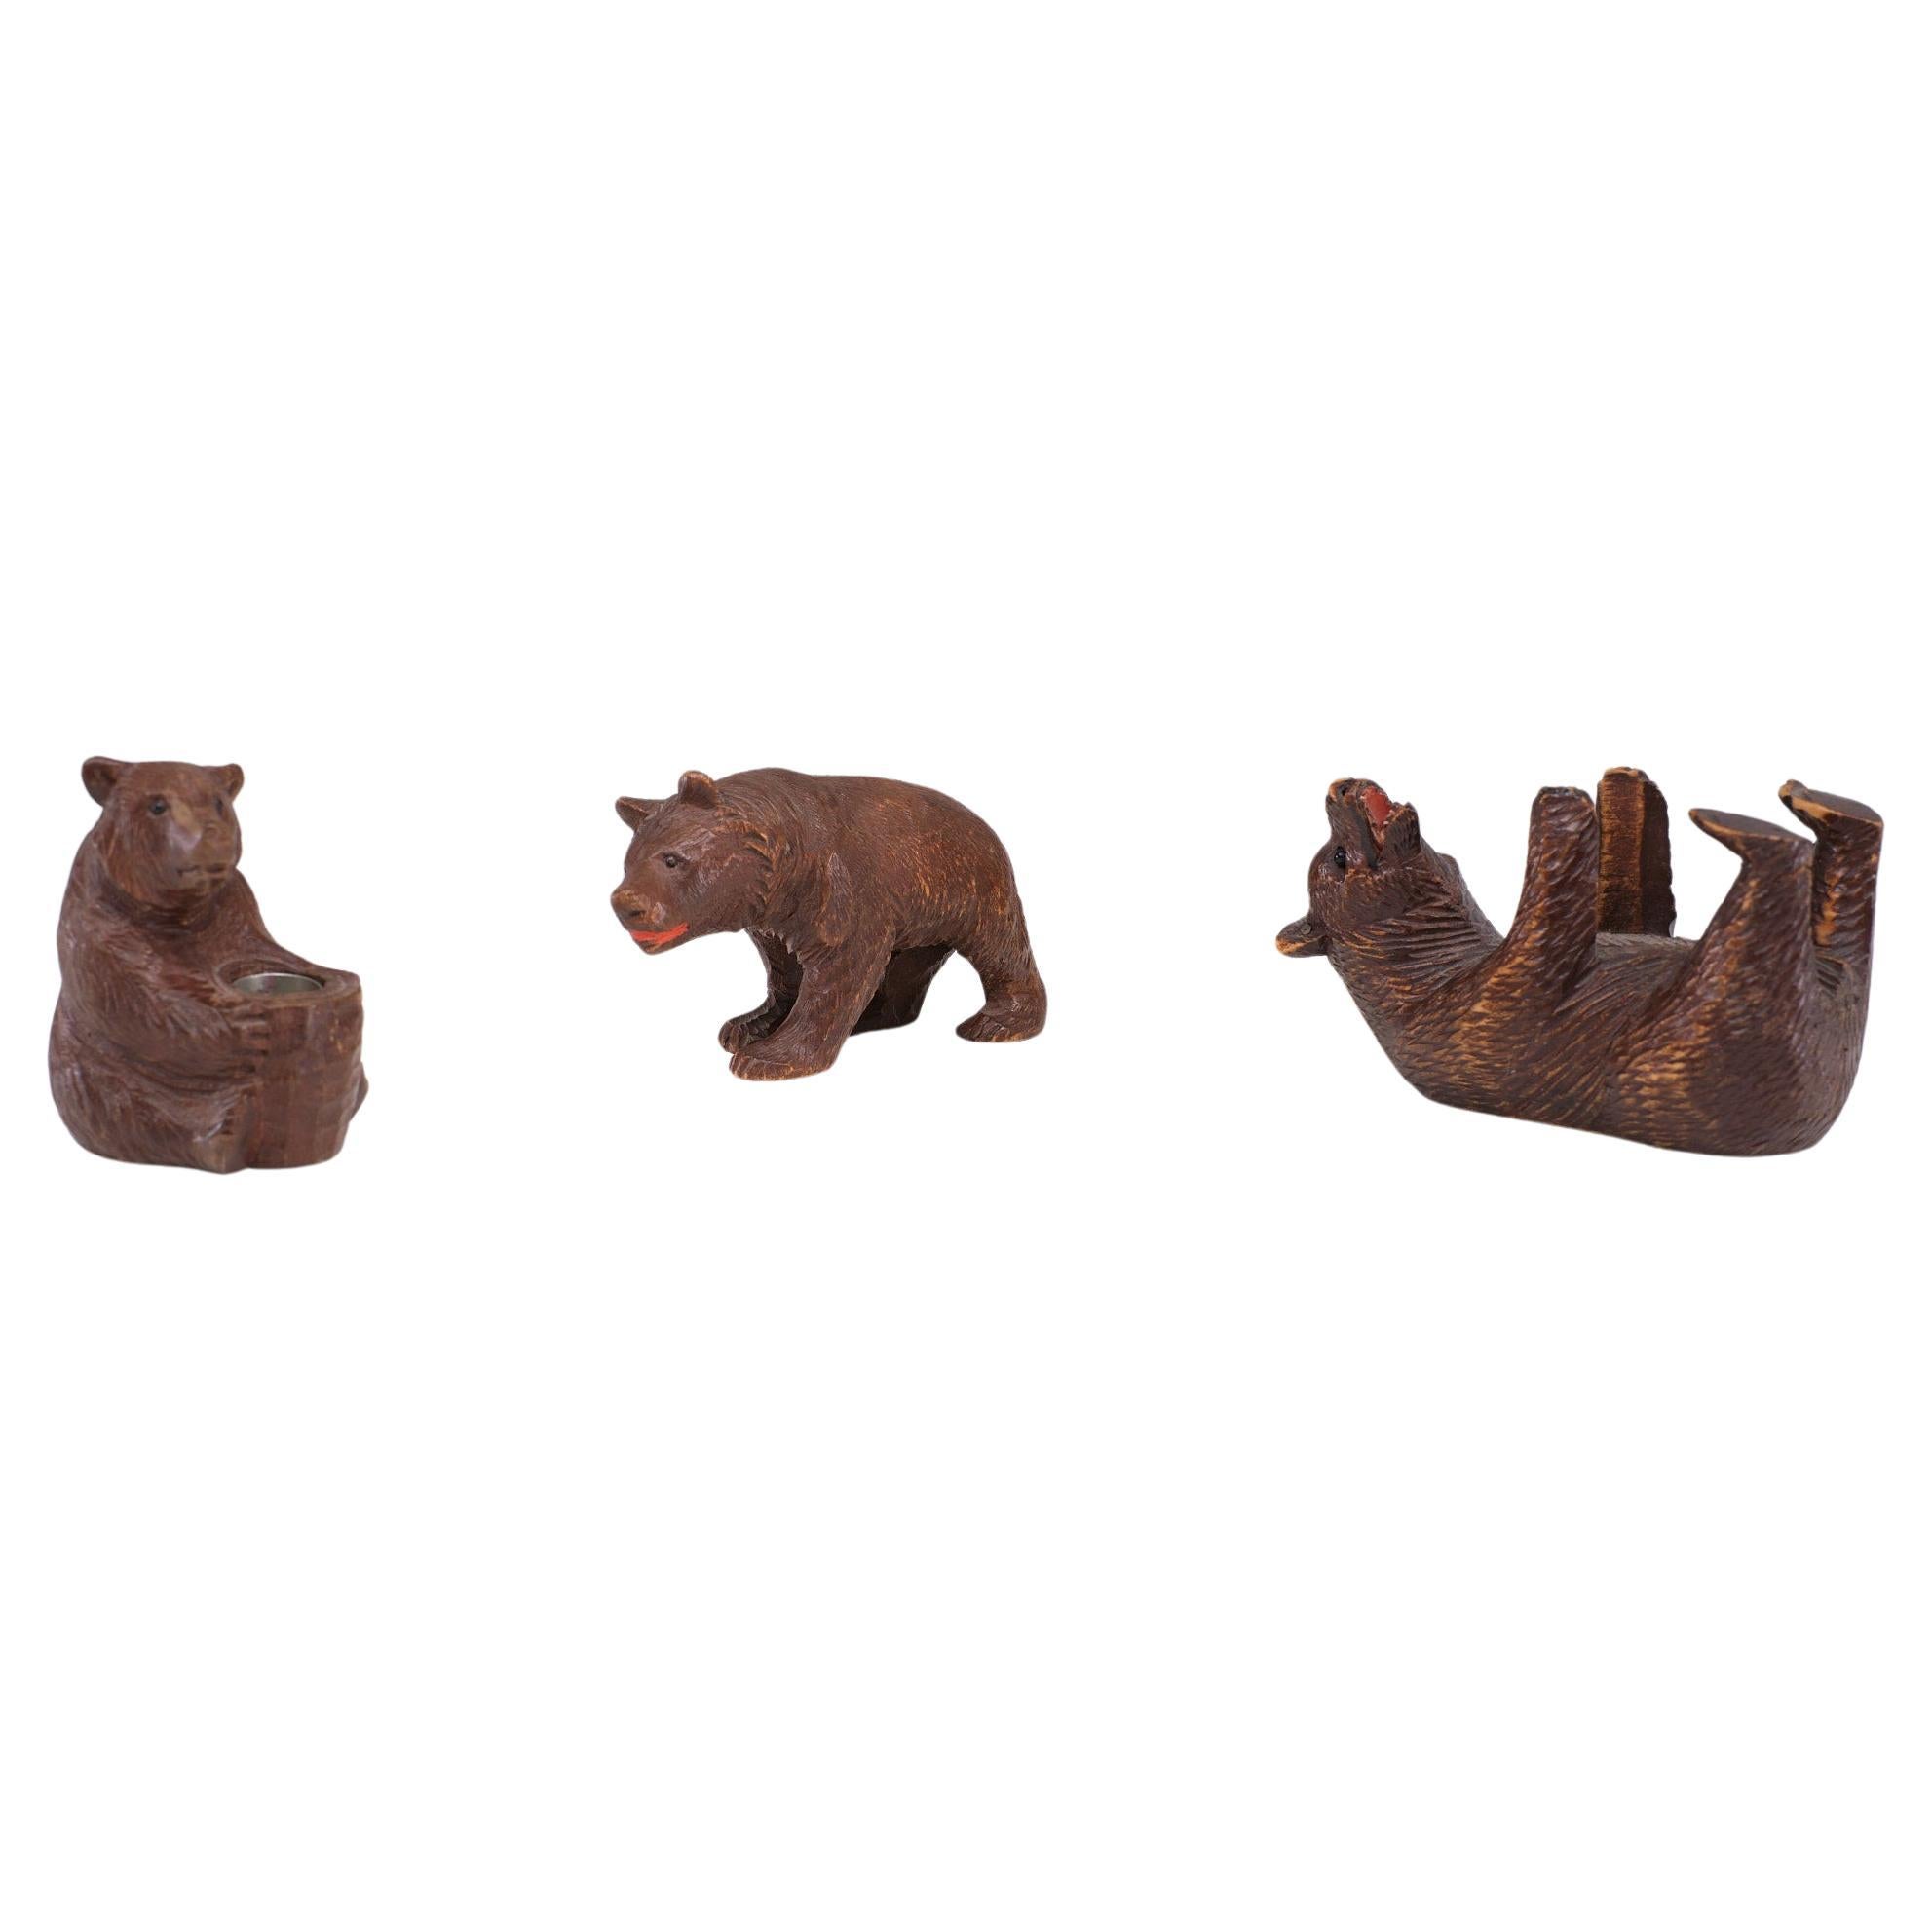 3 carved Black Forest miniature  Bears  1910s  Germany  In Good Condition For Sale In Den Haag, NL